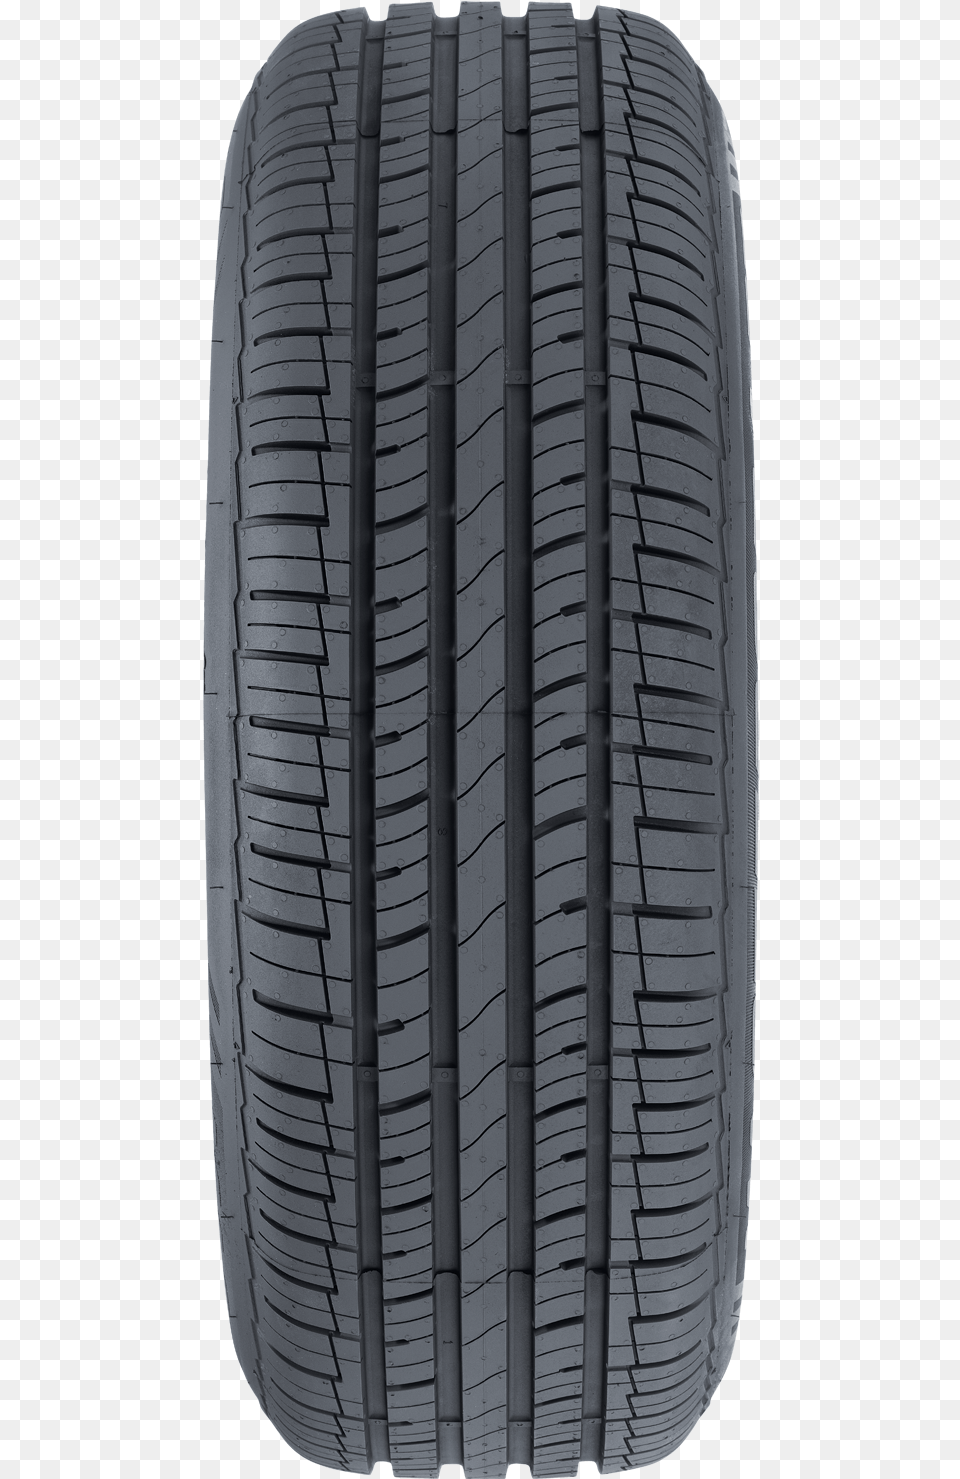 Stratus As Synthetic Rubber, Alloy Wheel, Car, Car Wheel, Machine Png